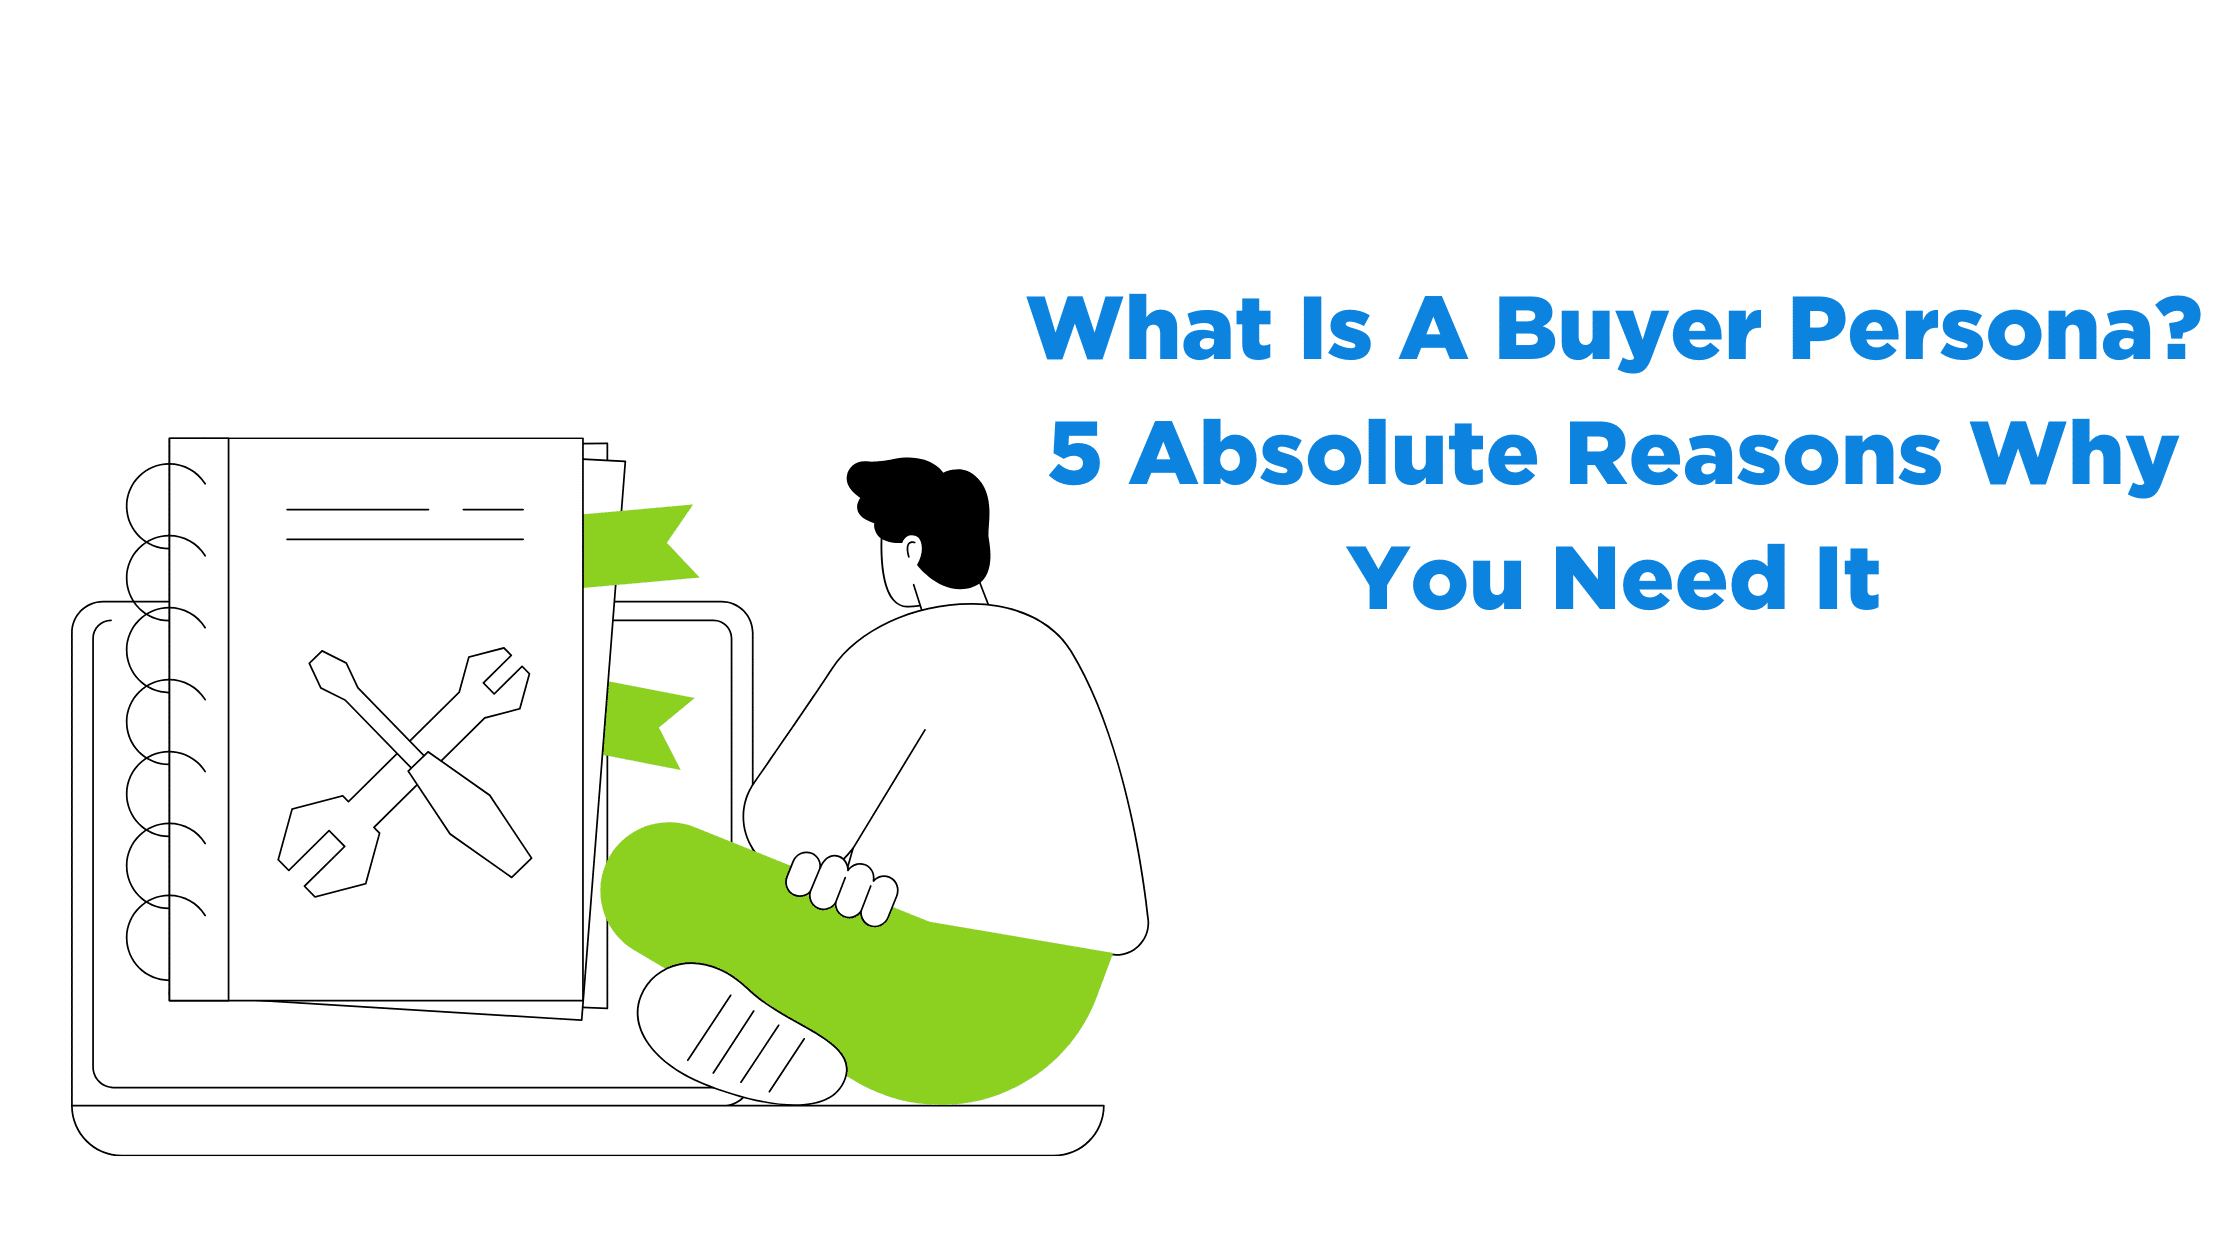 What Is A Buyer Persona? 5 Absolute Reasons Why You Need It